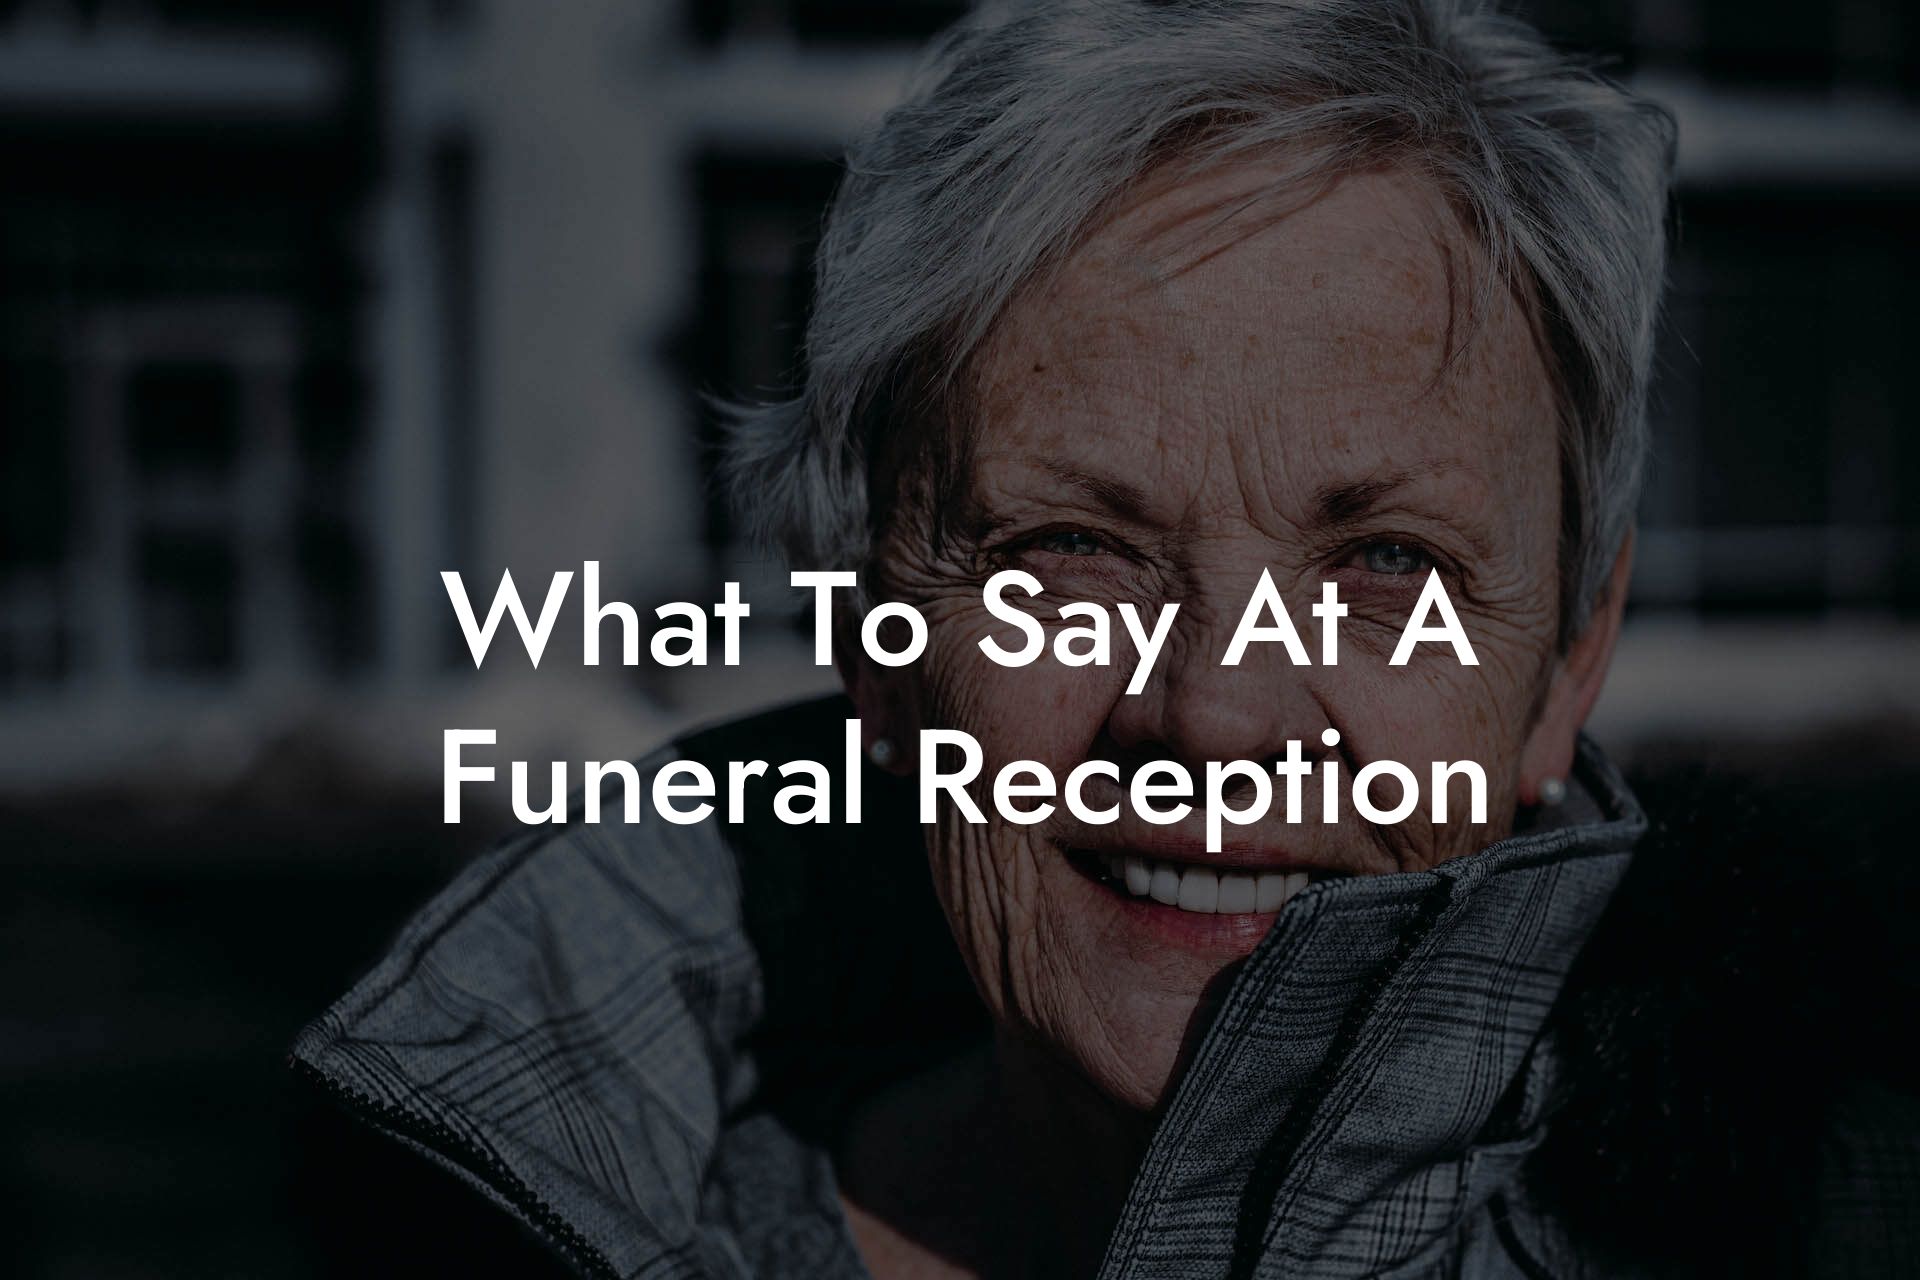 What To Say At A Funeral Reception